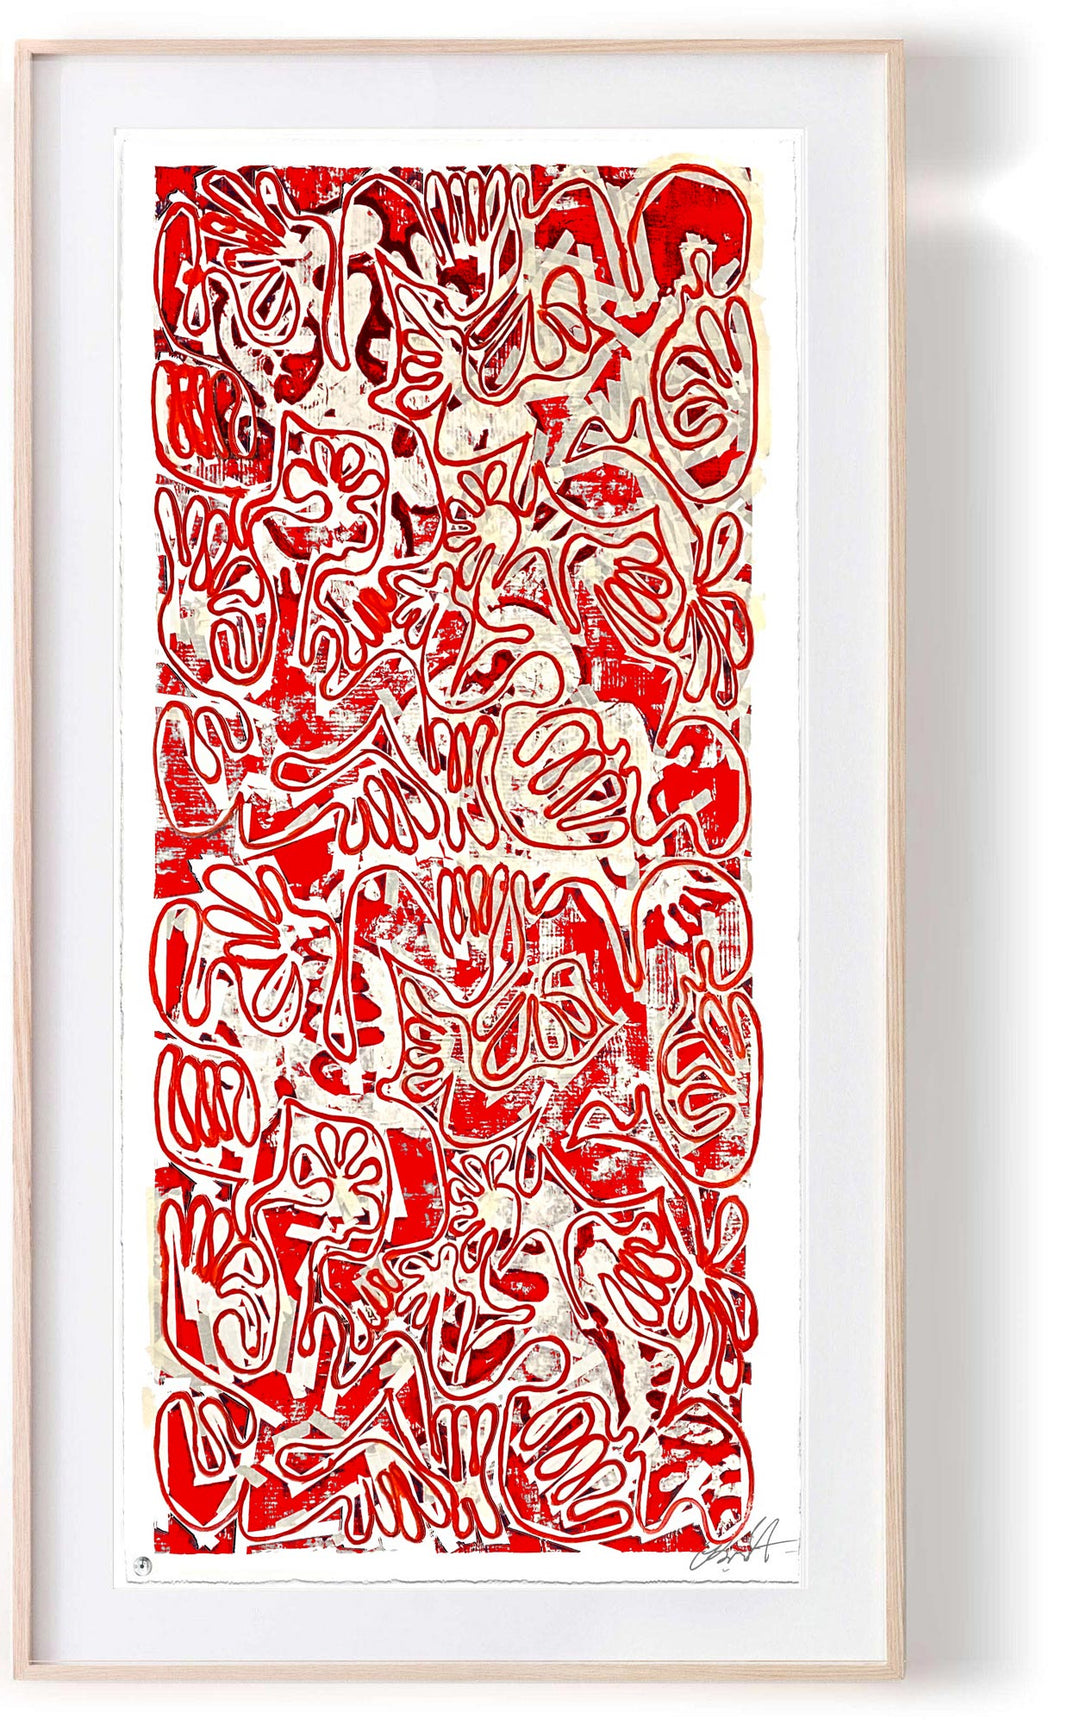 "Covid Chaos Pacific Red (40 x 100in)" by Robert Santore ©2022. Framed, Hand painted artist silkscreen print, hand printed on the finest archival cold press cotton rag paper with hand torn edges. Painted in the Manhattan studio.